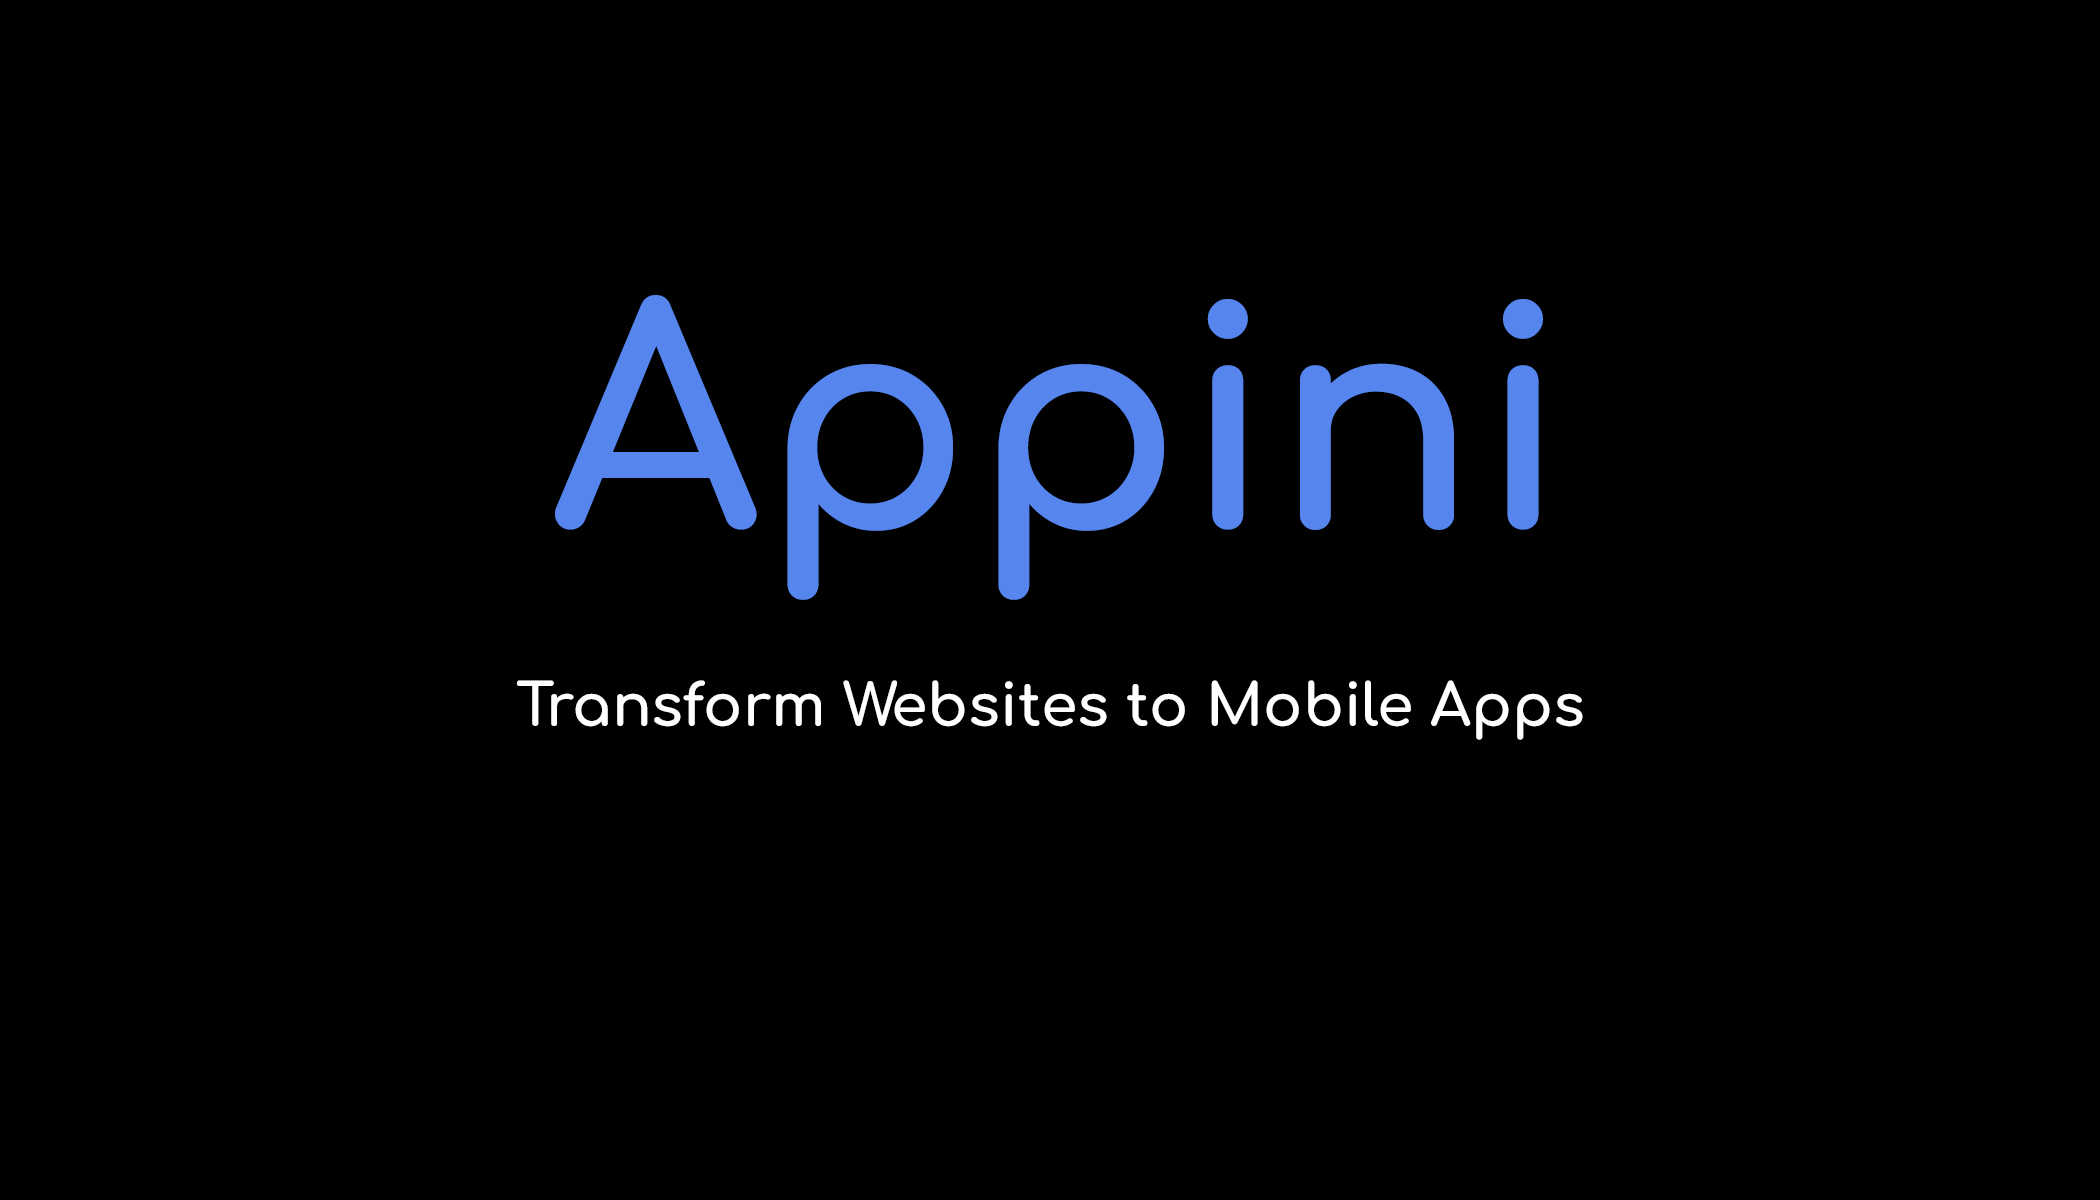 APPINI: Transform Websites to Mobile Apps